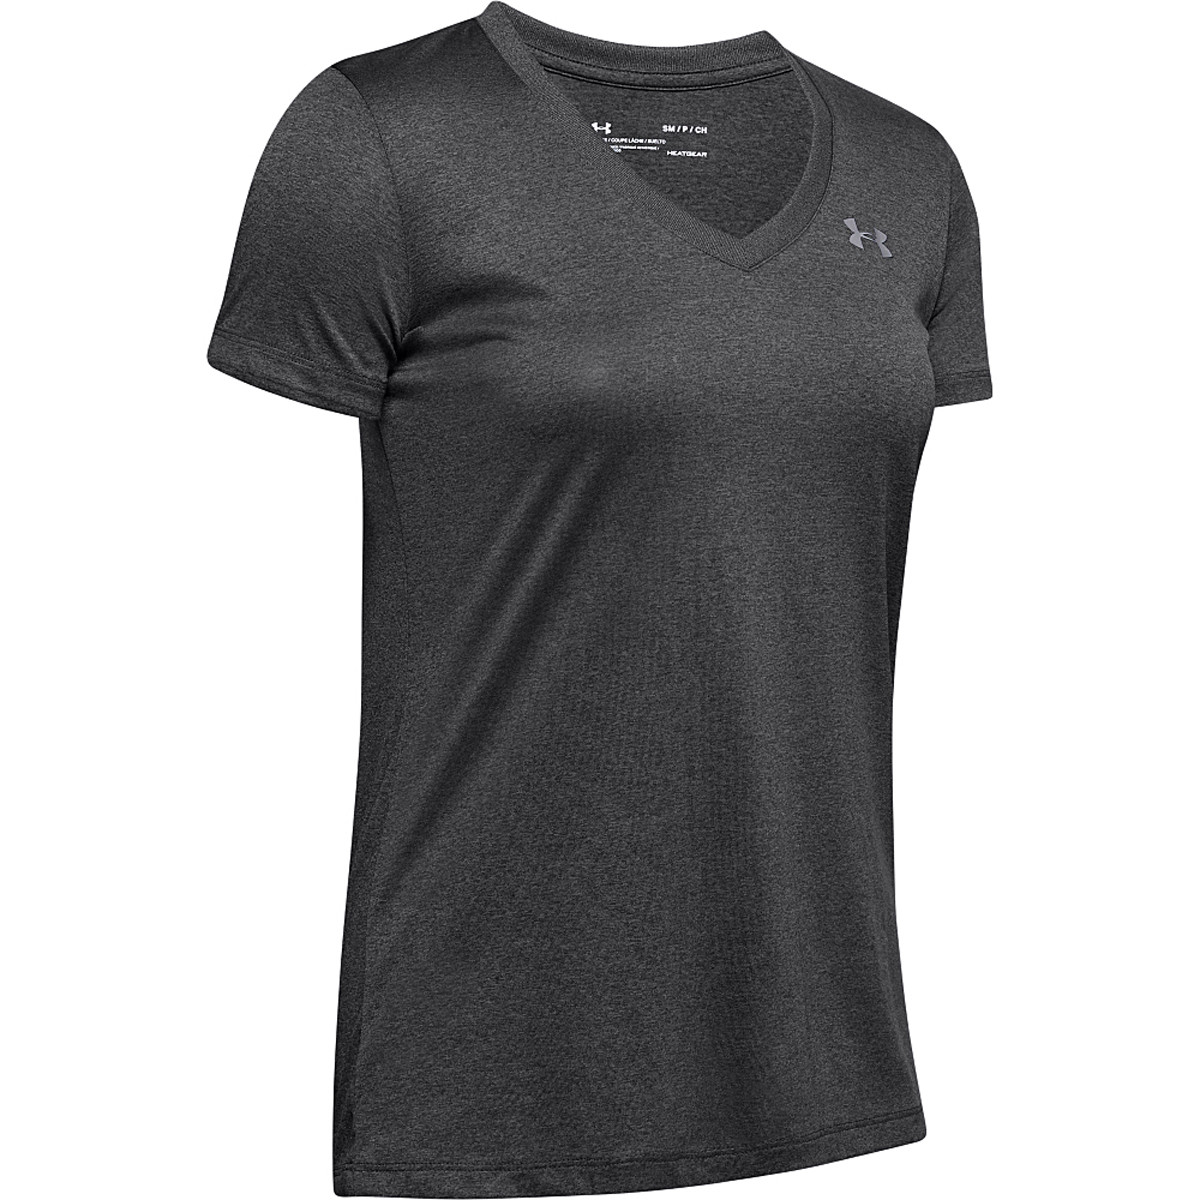 CAMISETA UNDER ARMOUR MUJER TECH SOLID - UNDER ARMOUR - Mujer - Ropa